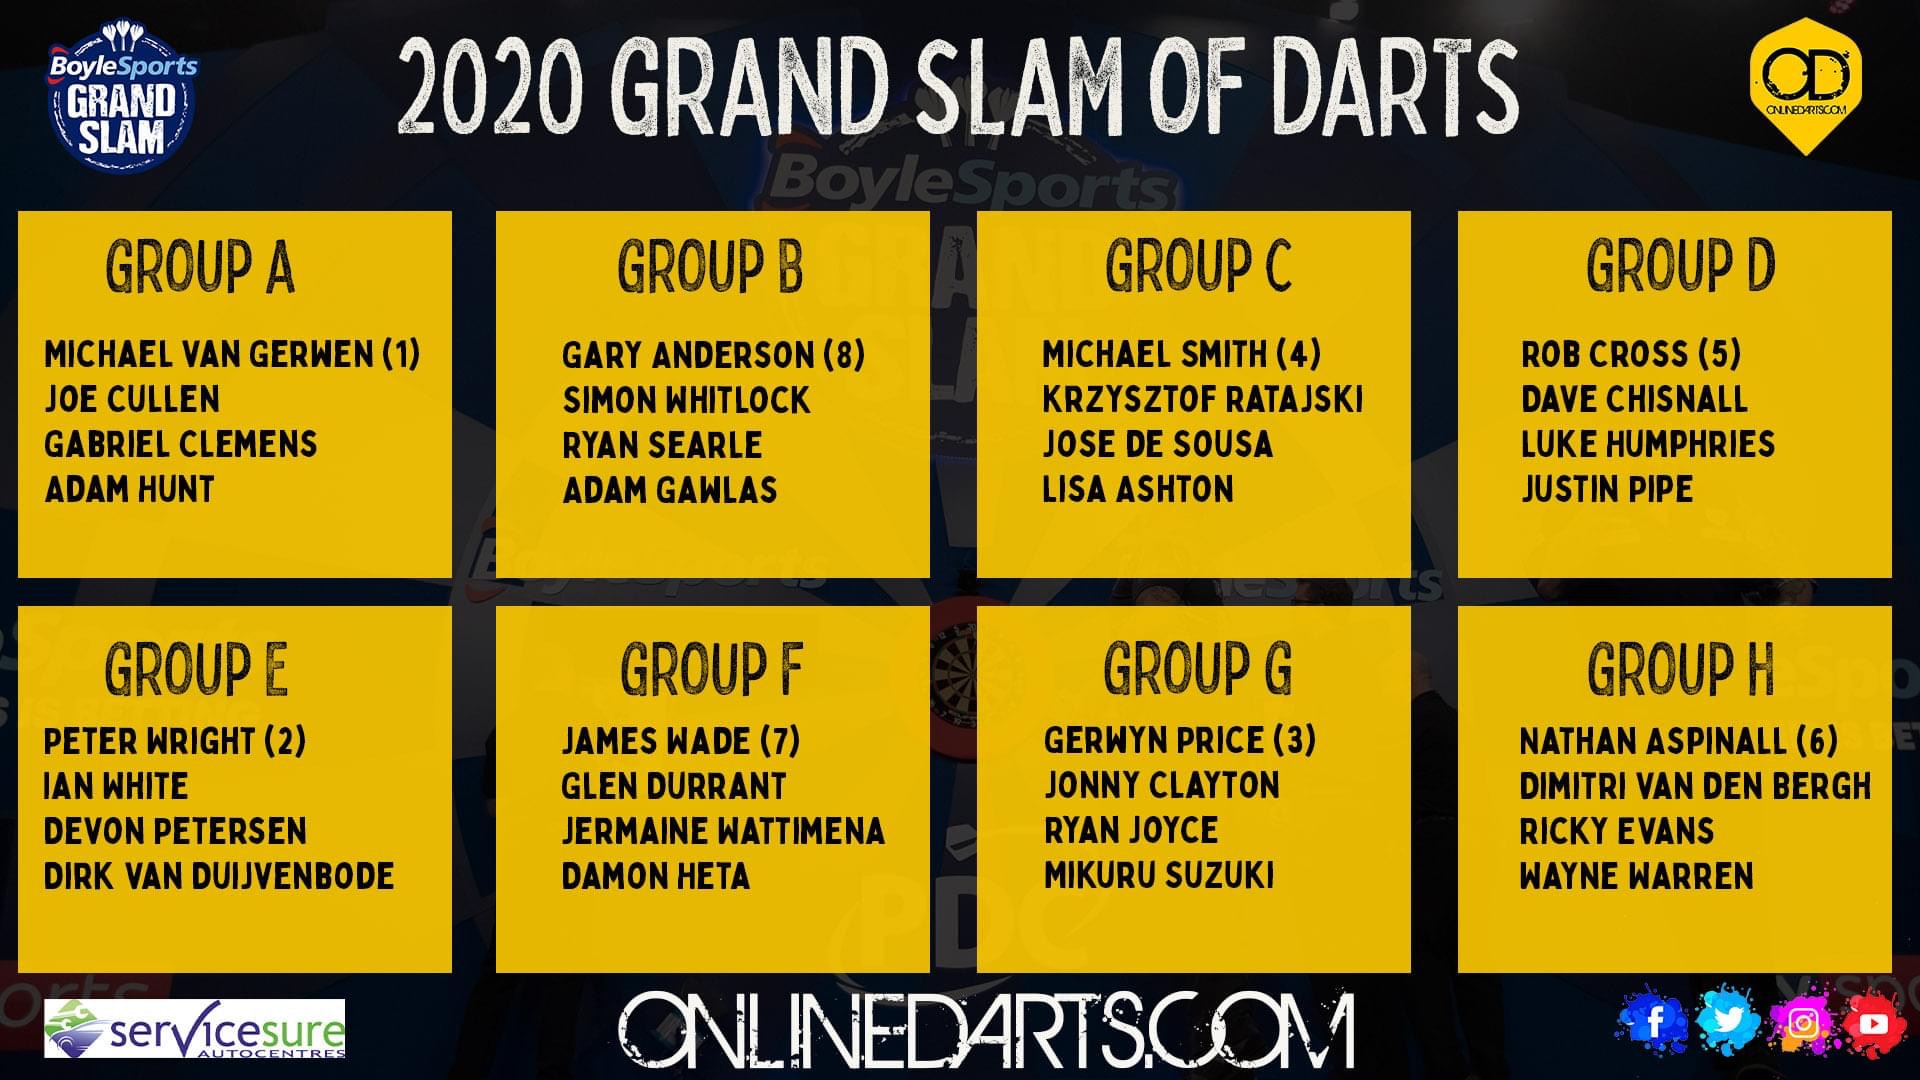 The BoyleSports Grand Slam of Darts Schedule, Results and How to Watch